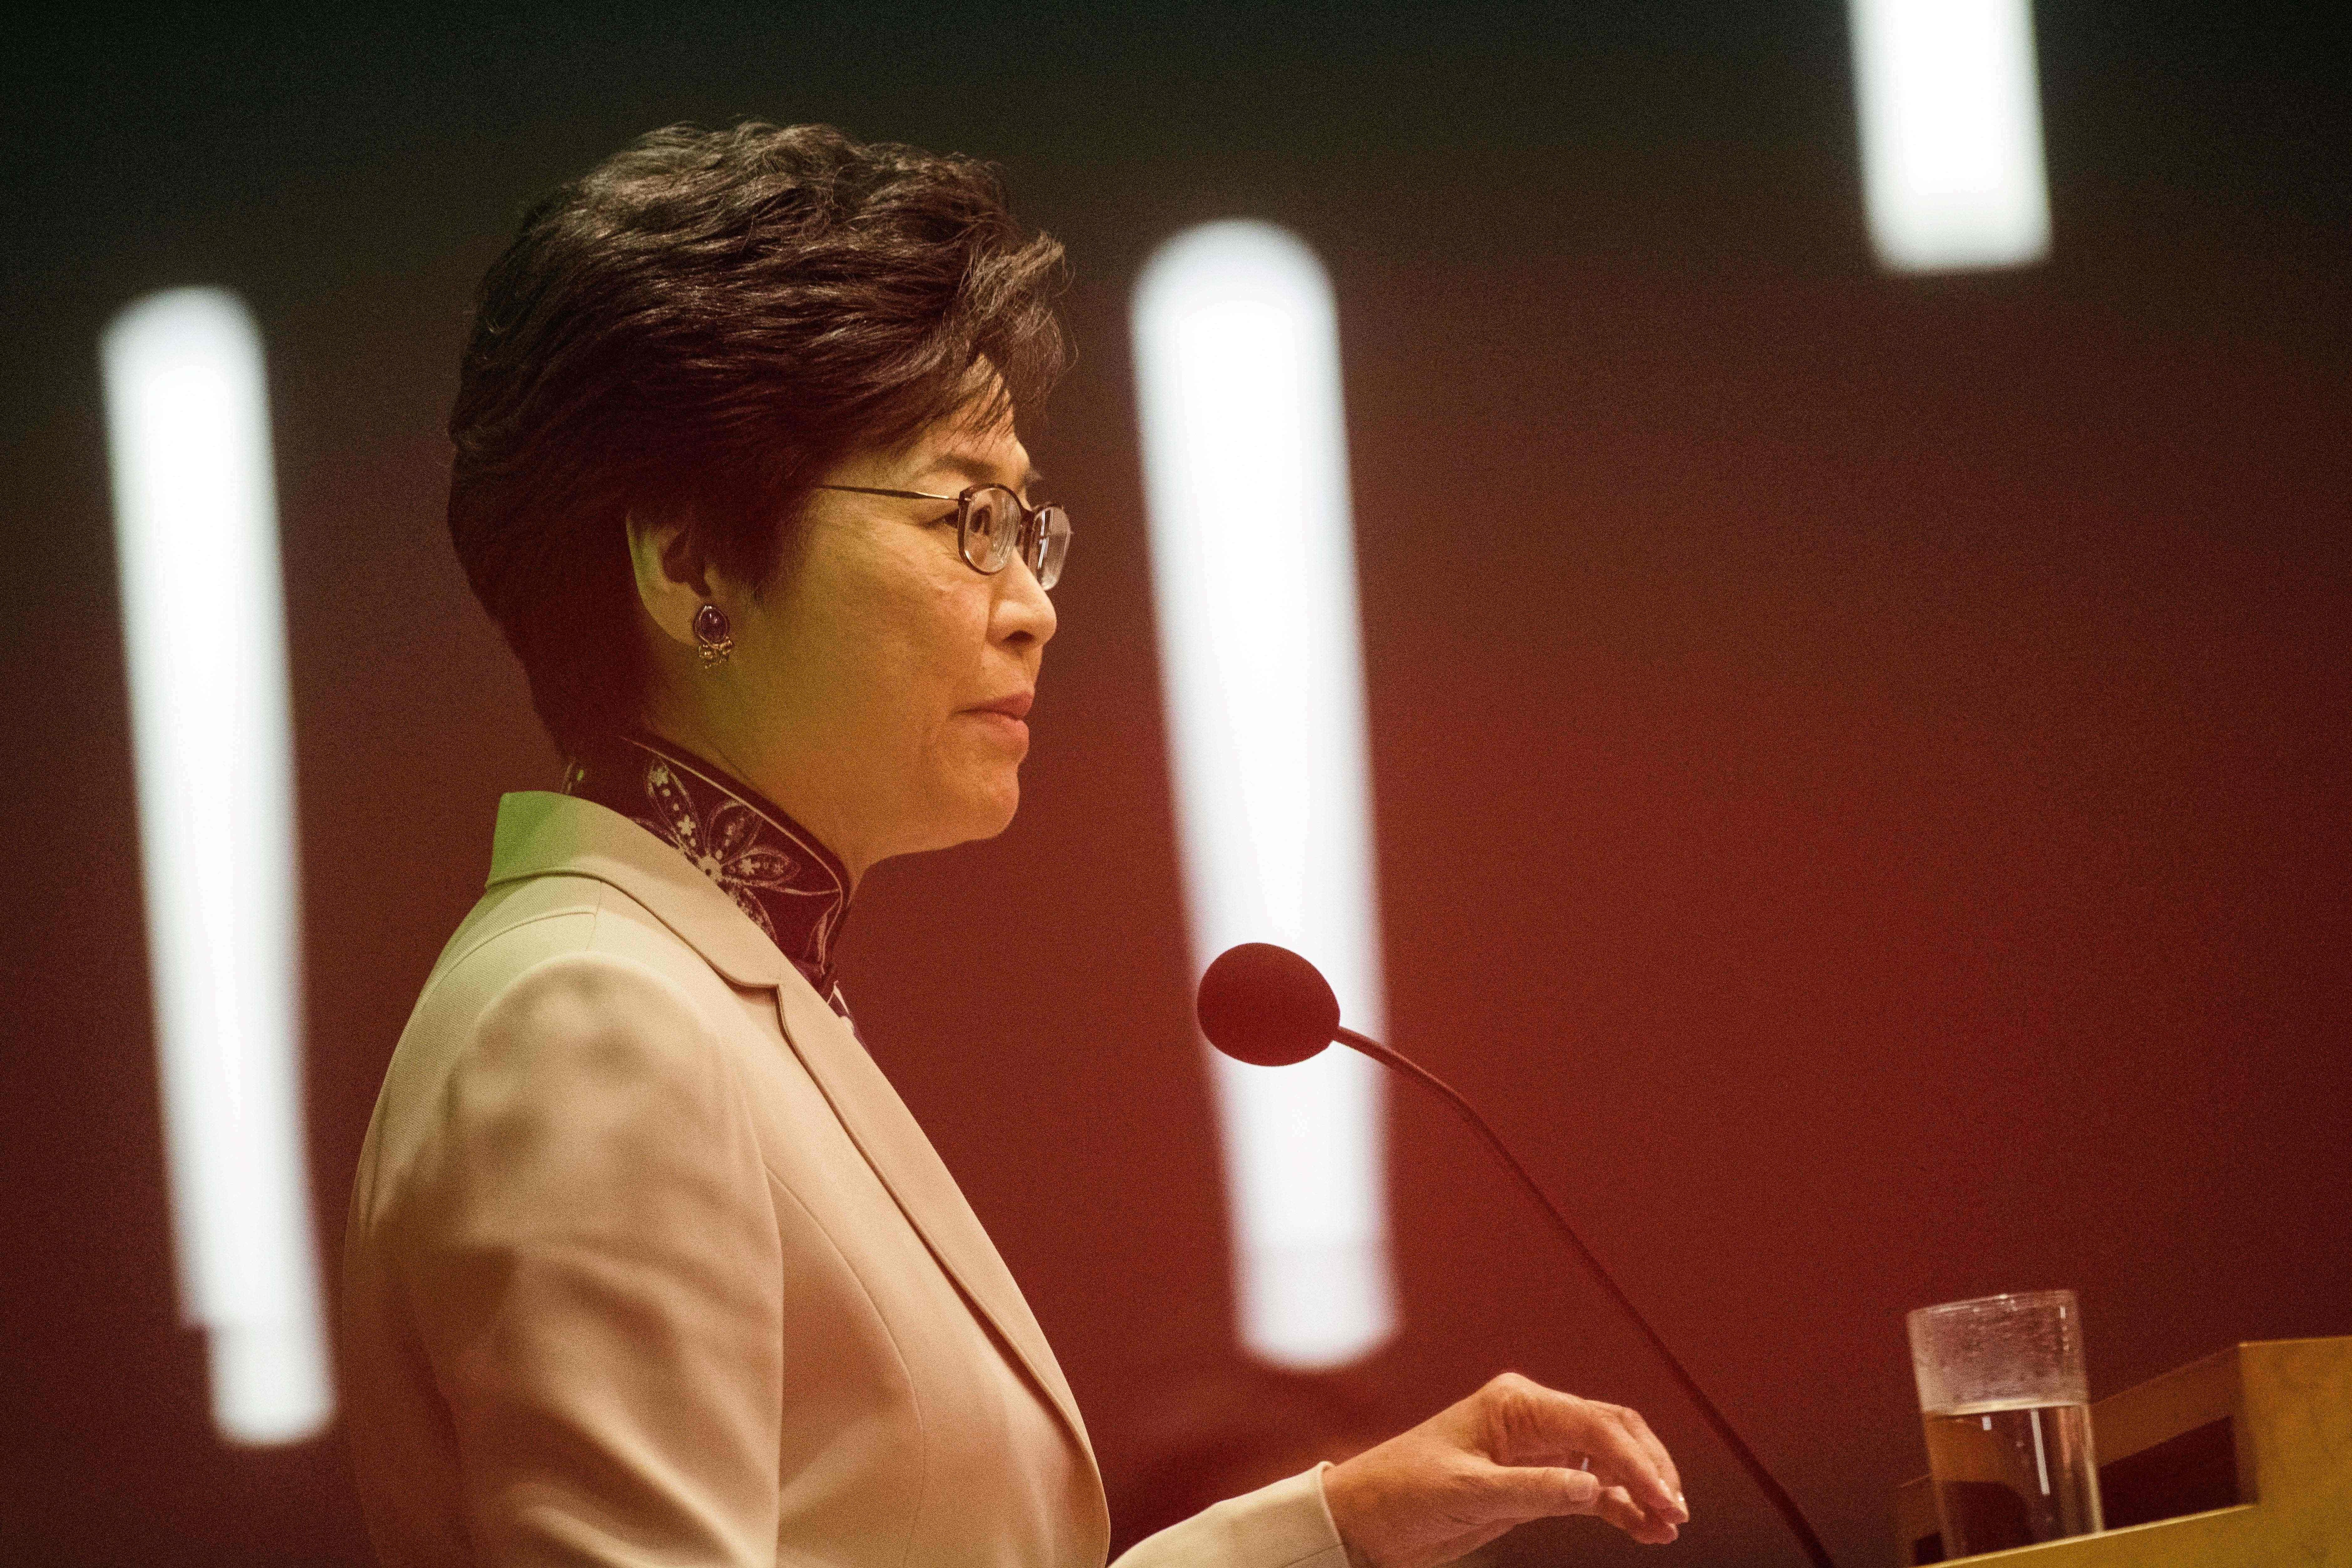 Hong Kong Chief Executive Carrie Lam answers questions during a press conference after her first policy address at the Legislative Council on Wednesday. Photo: AFP